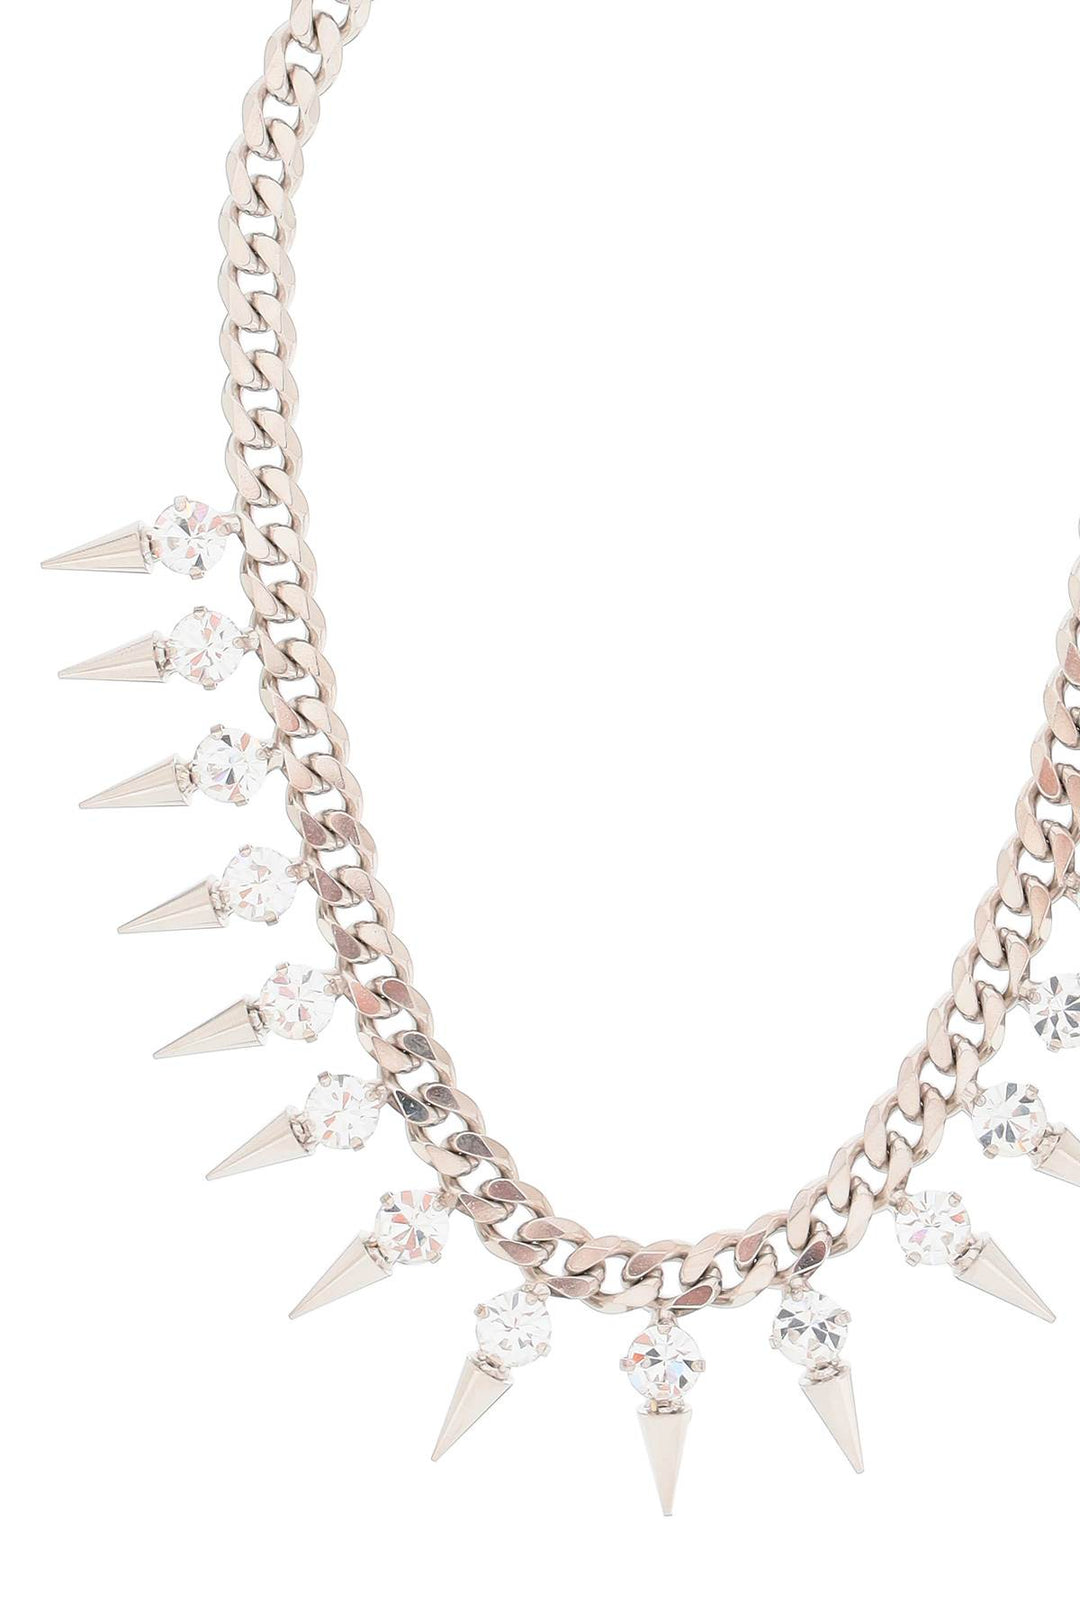 Alessandra Rich Choker With Crystals And Spikes   Argento